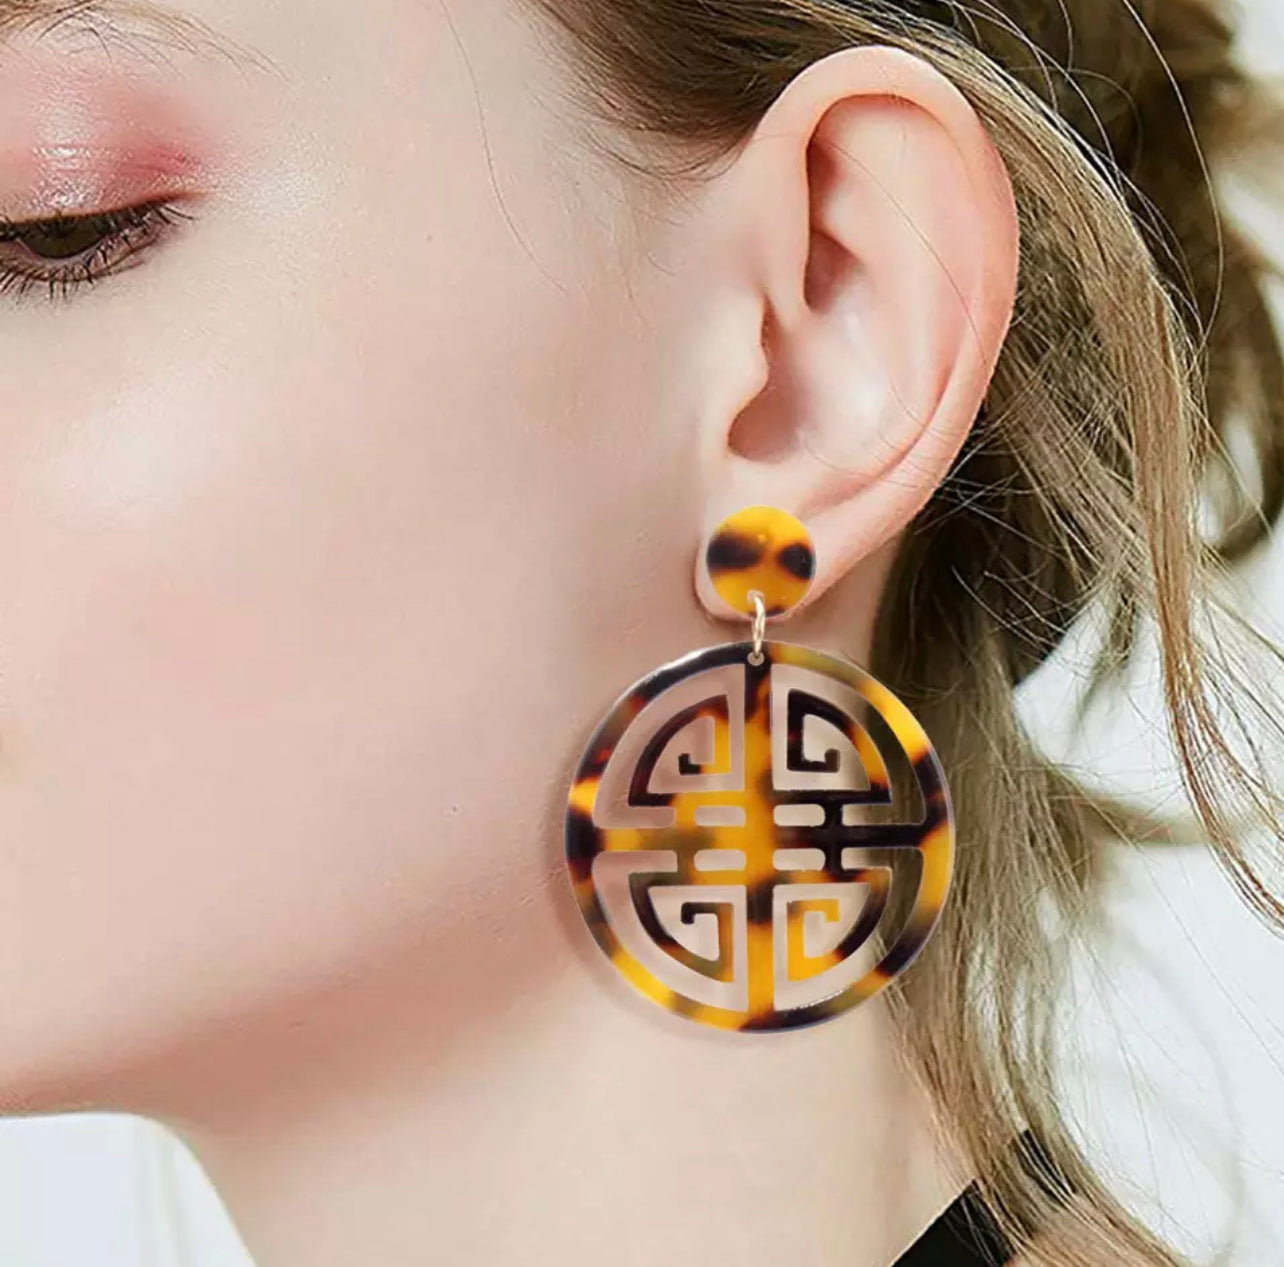 Tortoise shell earrings worn on young lady